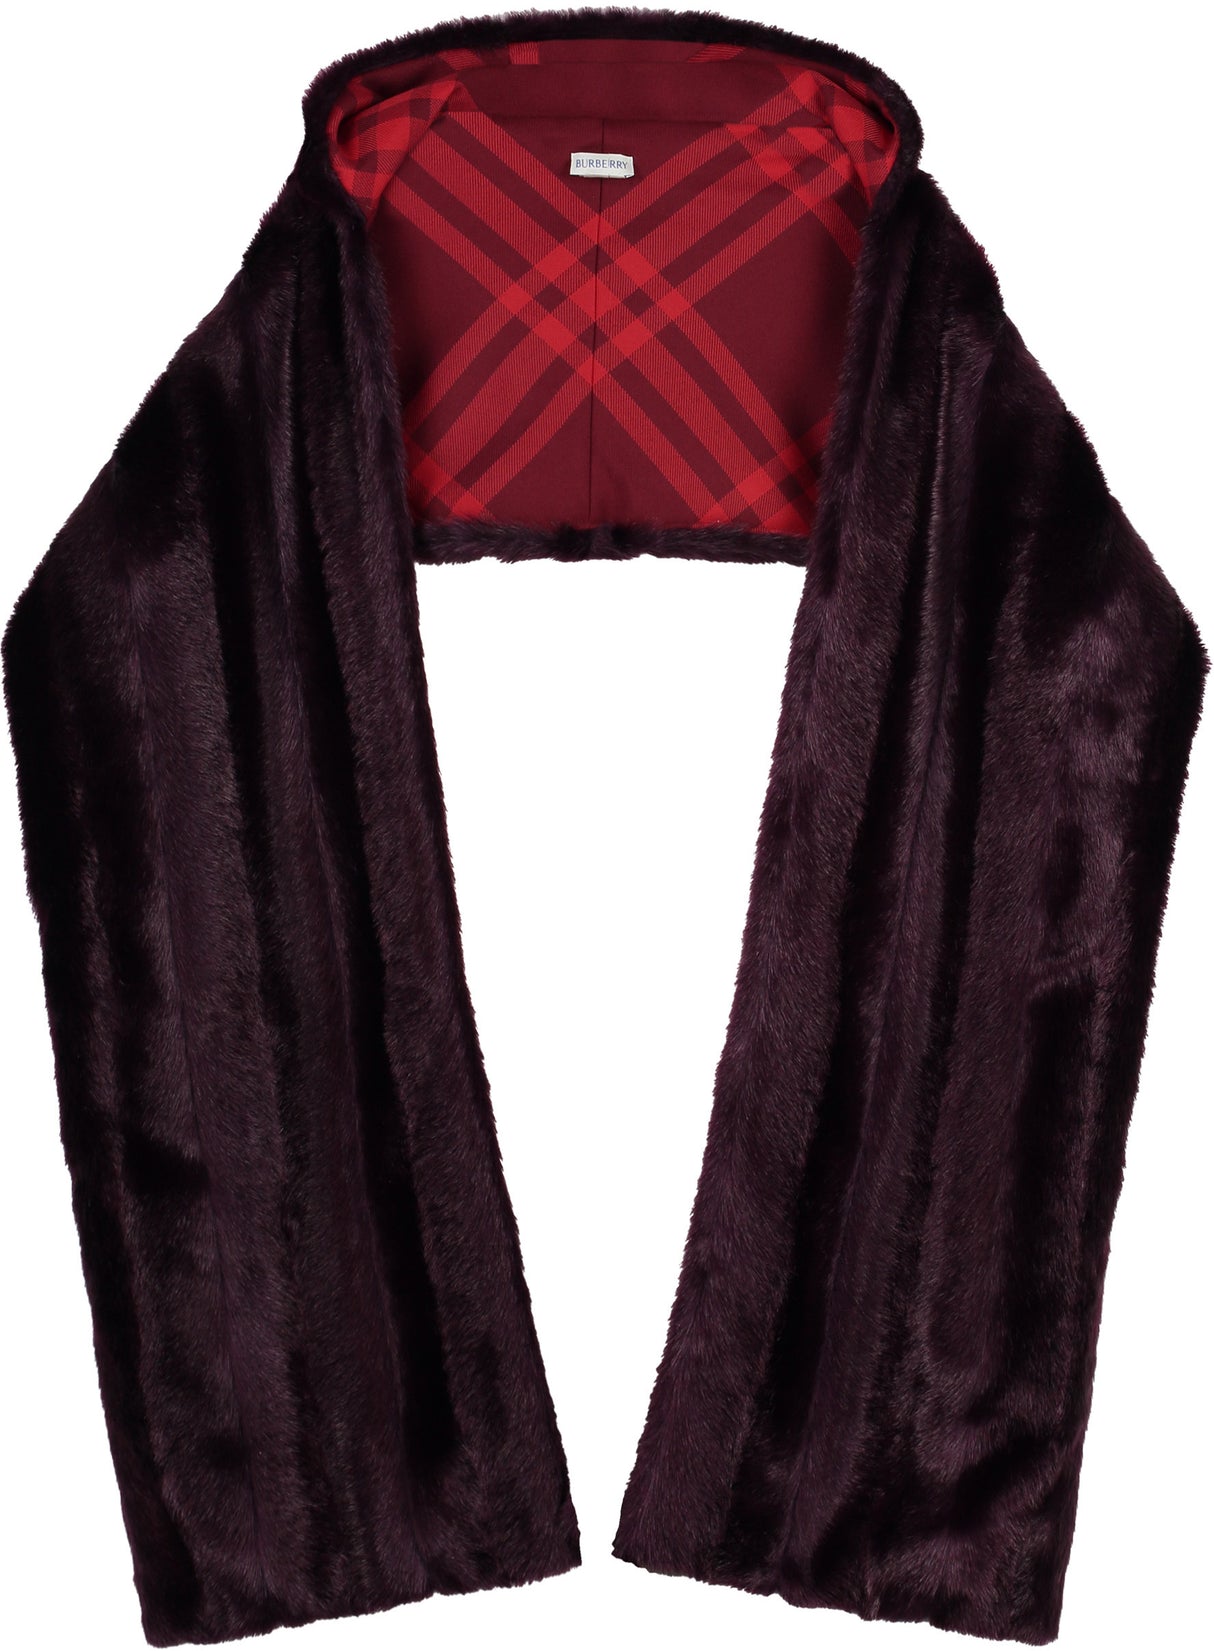 Men's Maroon Hooded Faux Fur Scarf with Check Motif Lining